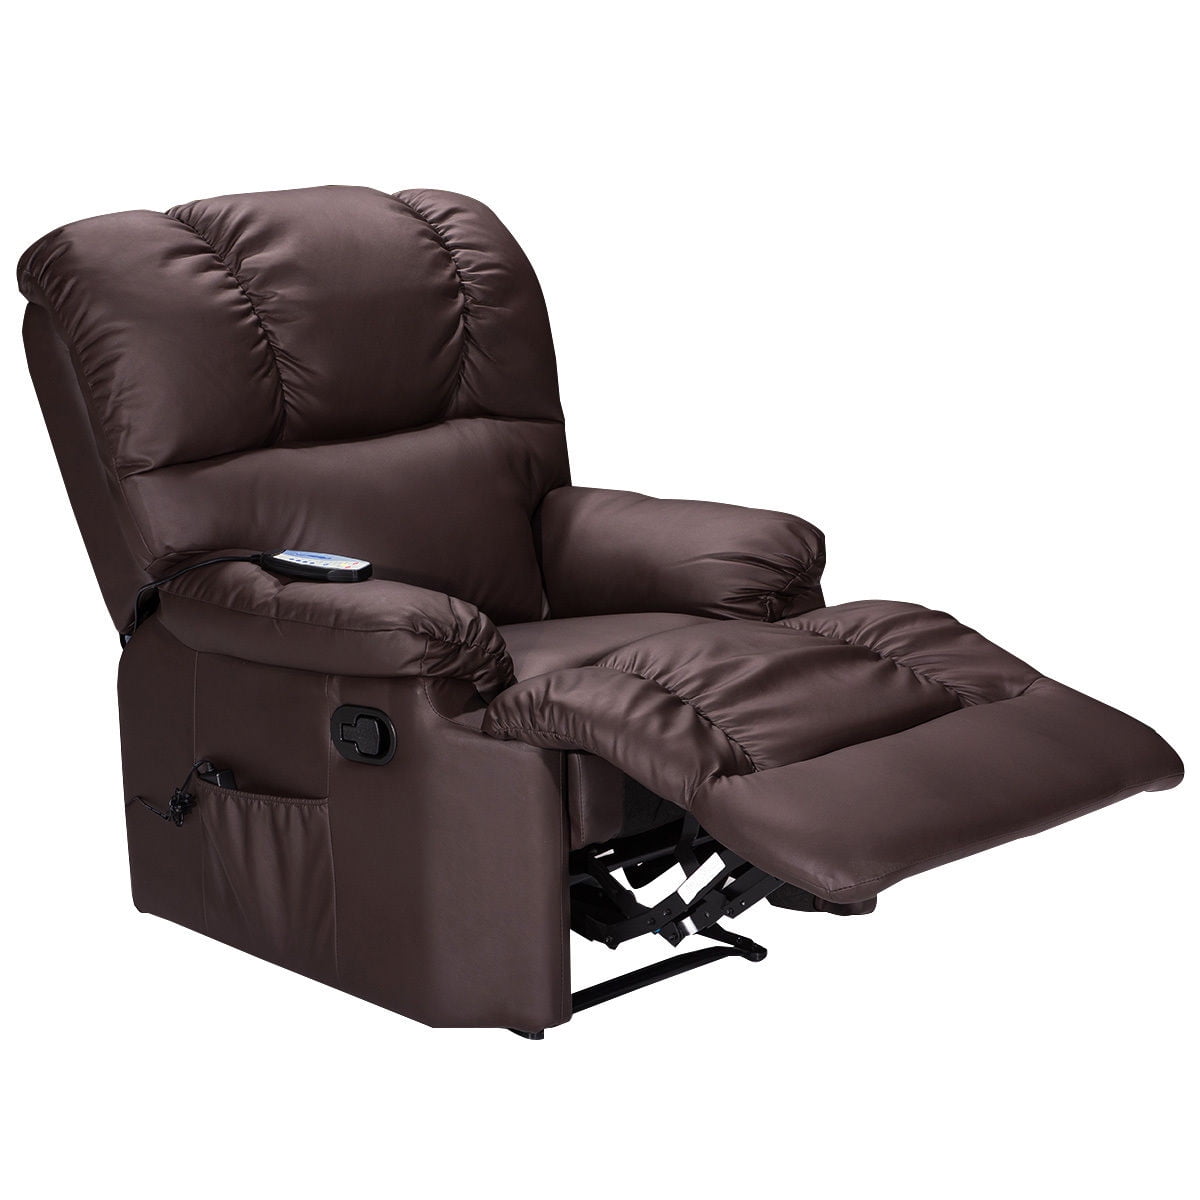 Costway Recliner Massage Sofa Chair Deluxe Ergonomic Lounge Couch